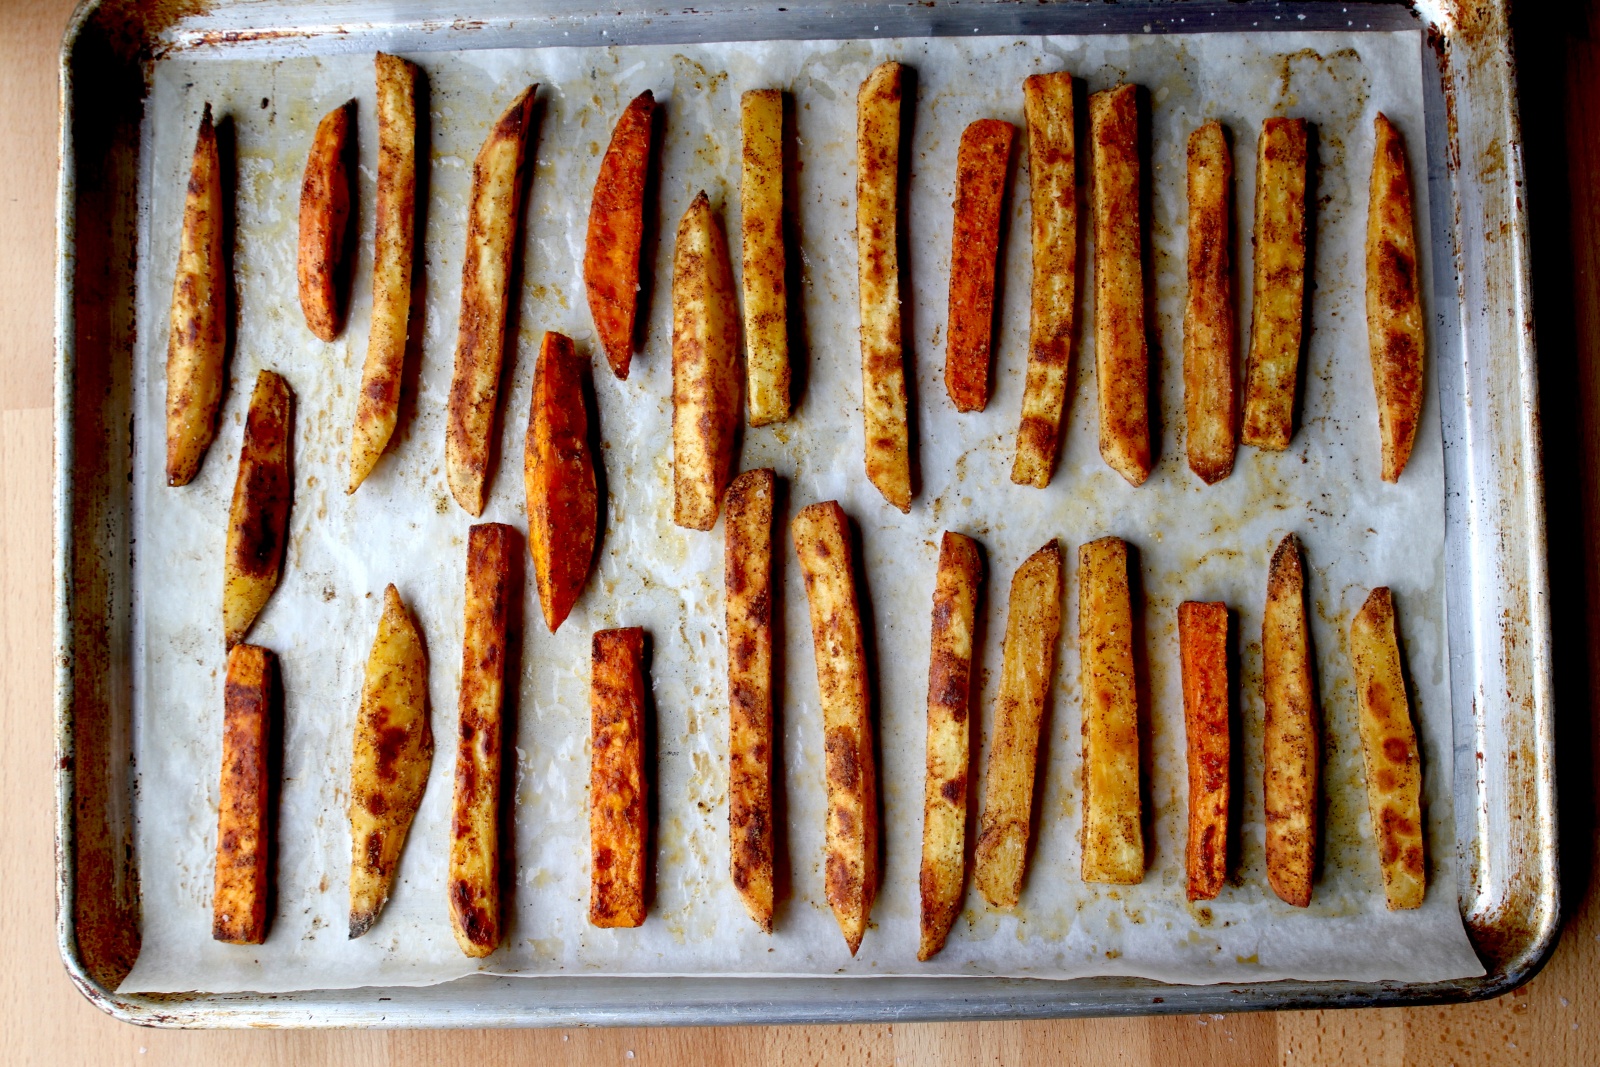 Super Crispy Sweet Potato Fries – made in the oven